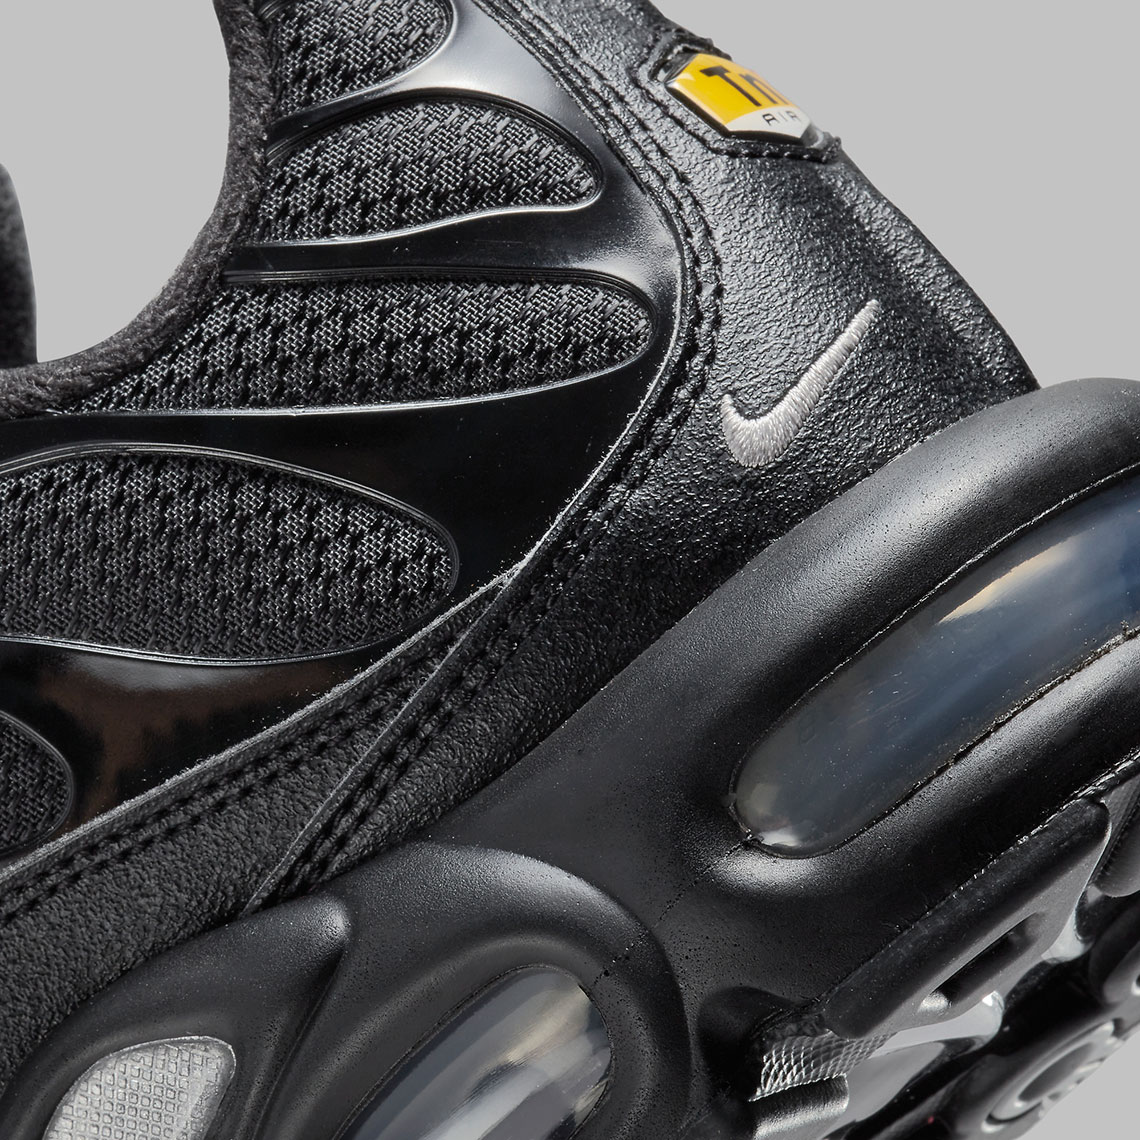 Nike Air Max Plus Black Silver Dx8971 001 Release Date 4